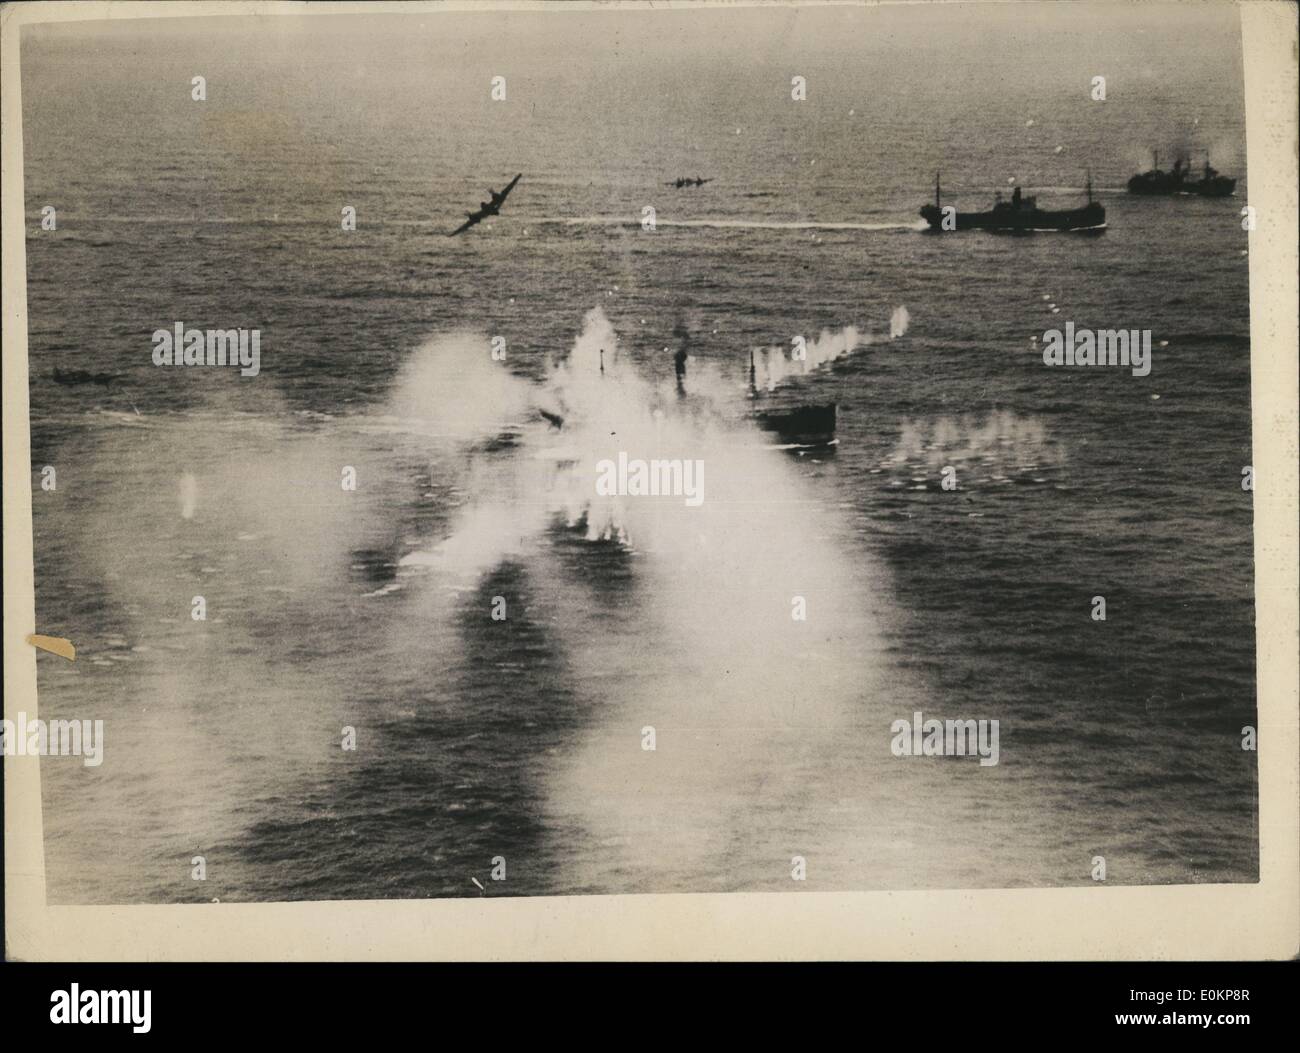 Apr. 04, 1944 - Not For Publication Before The Evening Pares Of Tuesday British Official Photograph No.C.4243(WK) Air Ministry Photo-Crown Copyright Reserves. Picture Issues April 1944. Beaufighters Torpedo Enemy Ships. See A.M.B No. 13436 of 30.3.1944 Two heavily laden merchant ships were hiy by torpesoes and ay least three others, in assignation to all five in the esocry vessels, were damages eve cannon fire when a beaufighter strike wing of R.A.F. Coastal Command Attackes a Large German Convoy Off the friesian islands on the evening of the 29th march Stock Photo